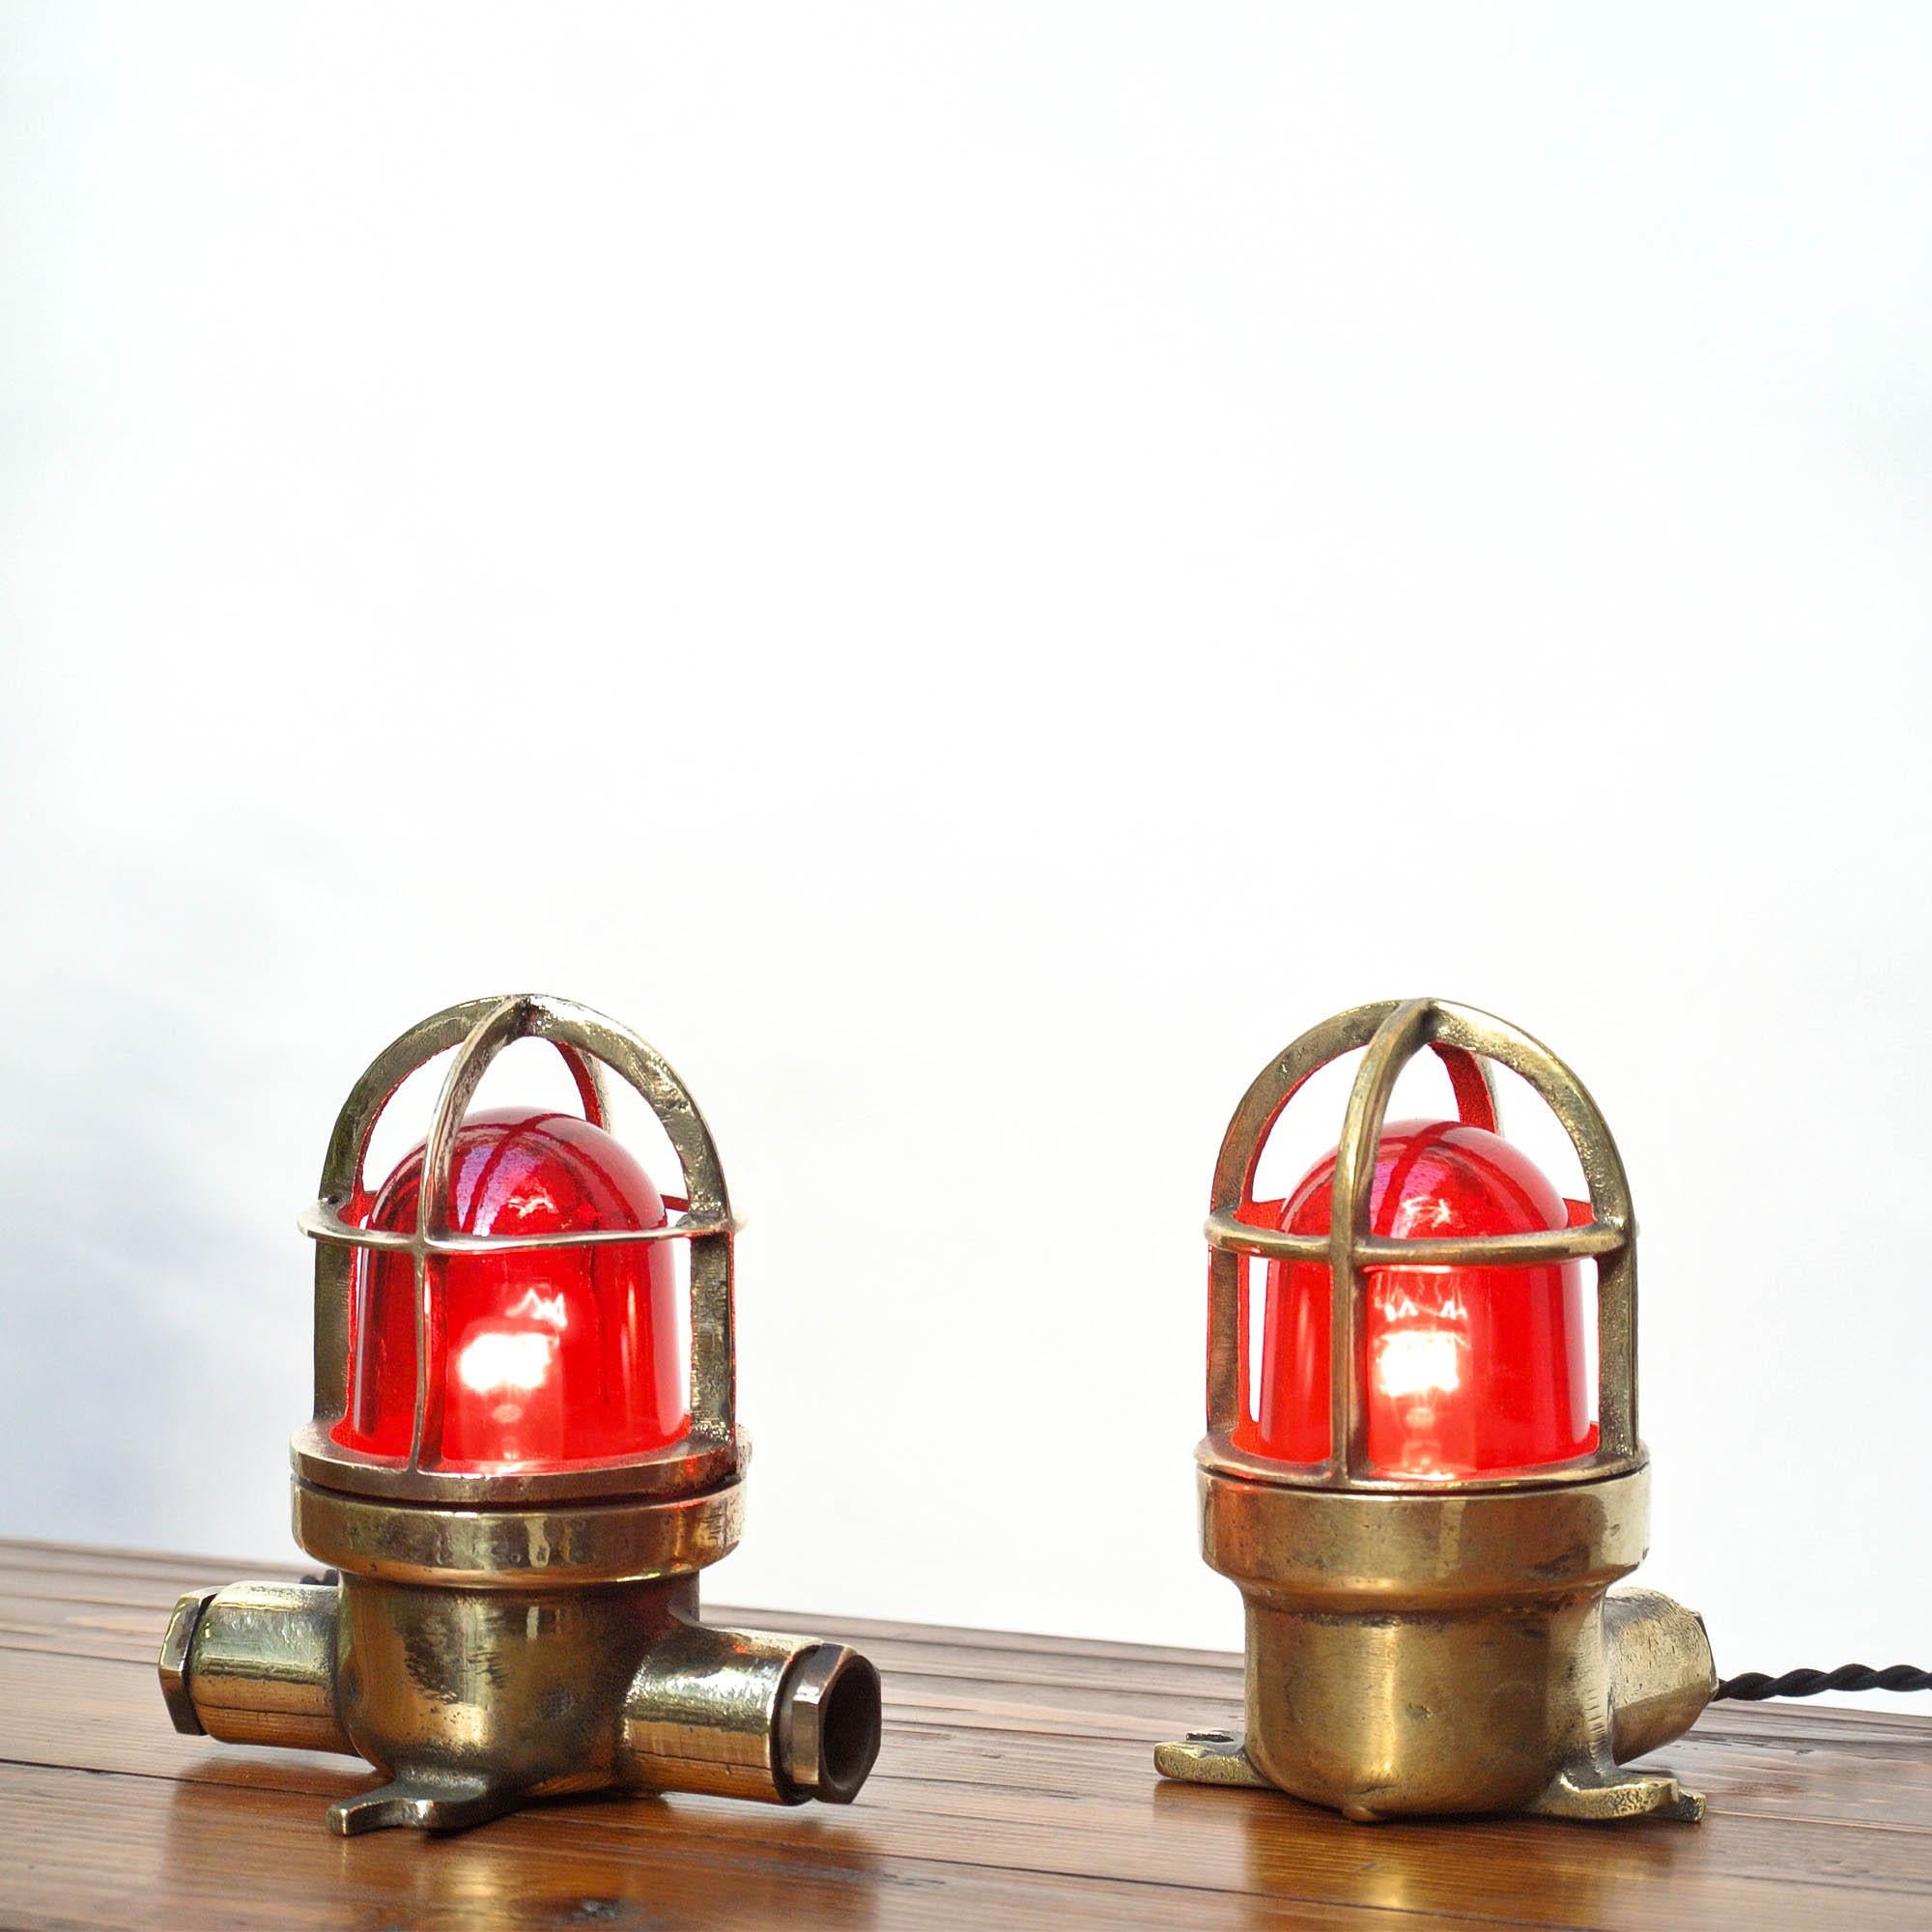 Pair of vintage small signal lamp in brass with red glass. Perfect for a bright decoration!

 